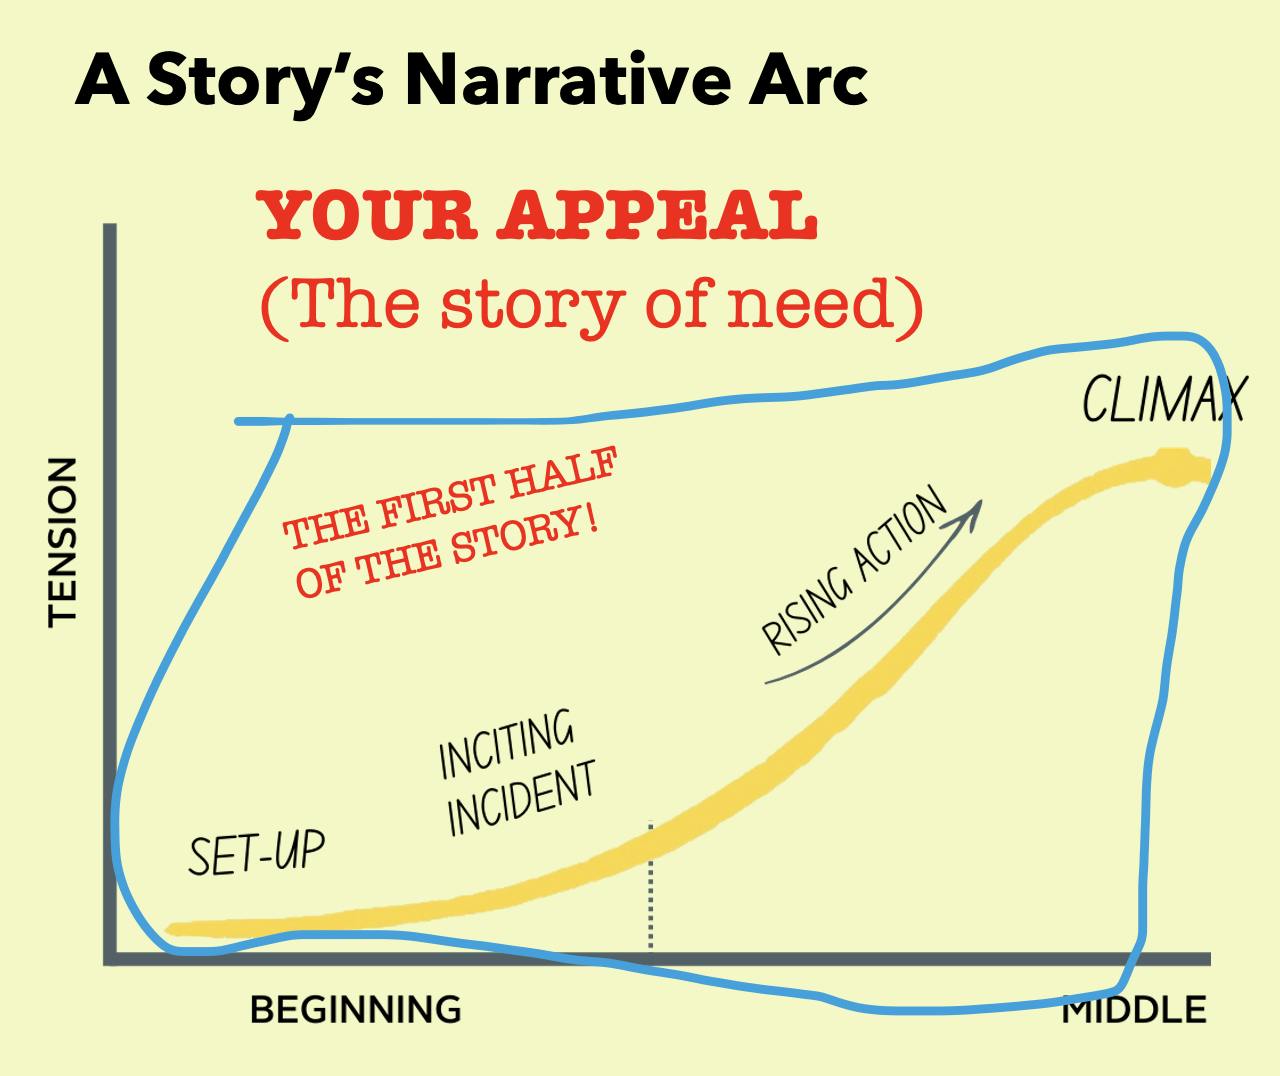 A story's narrative arc: this image is half of the story arc as shown in the previous image. It shows that the appeal (the story of need) is told from "set up" until the point where the transformation takes place (climax).